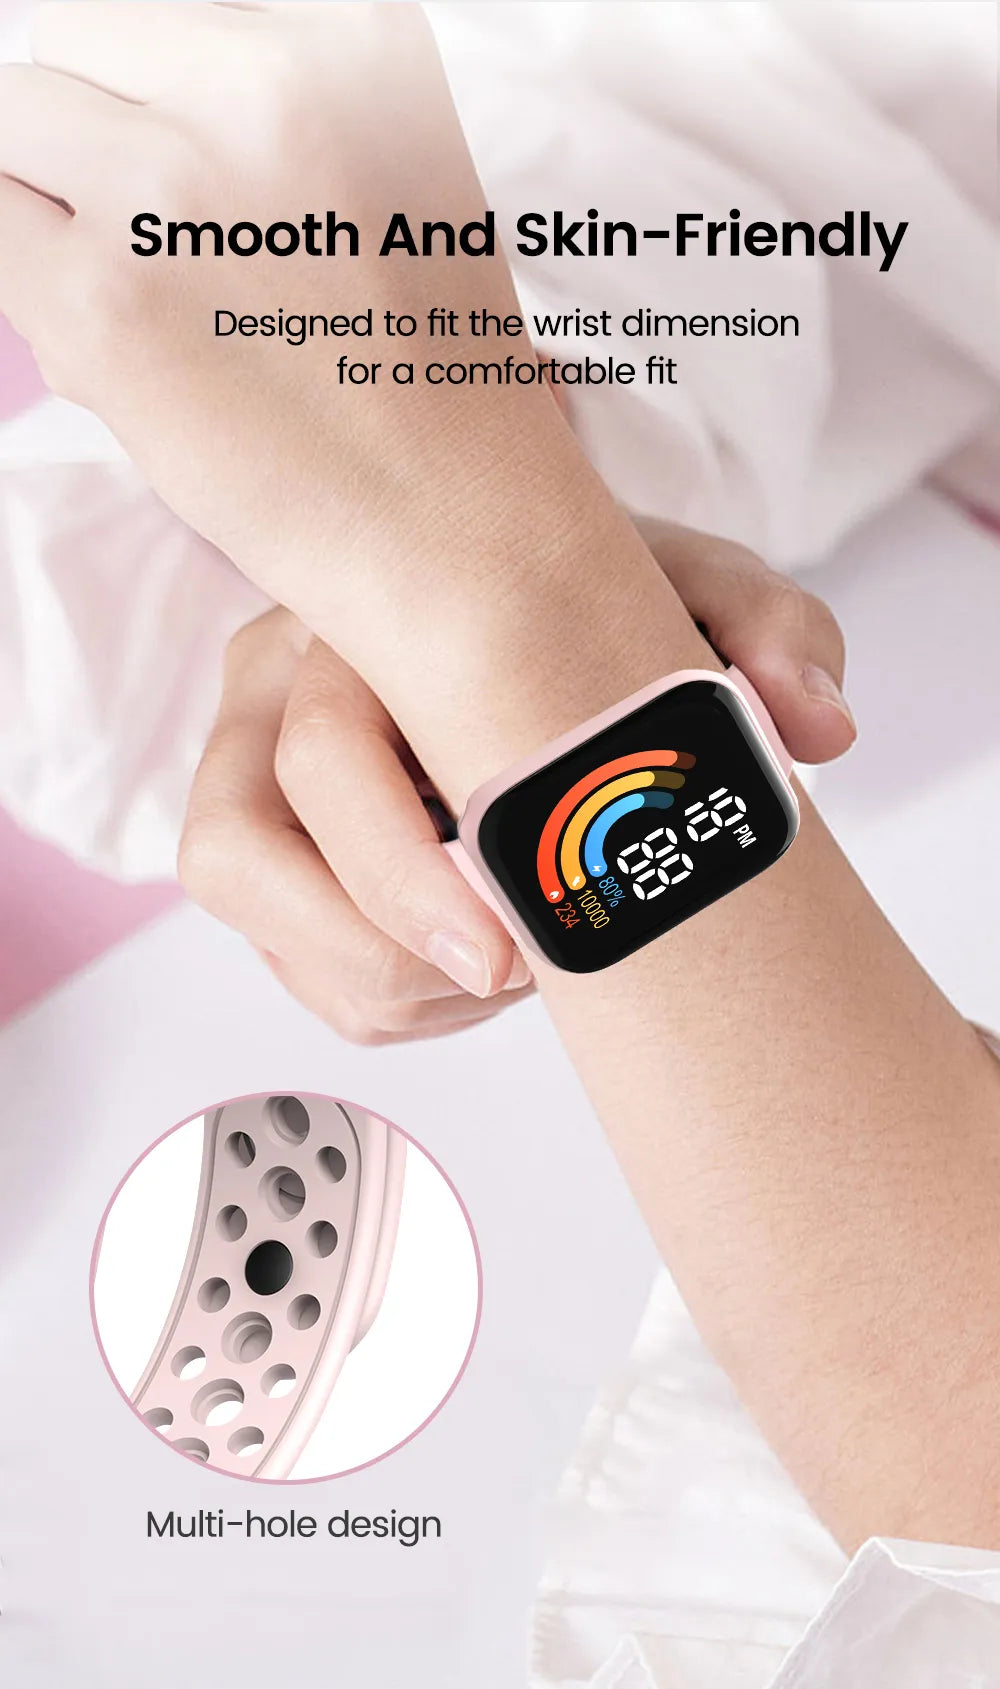 Child Watch Ultra Light LED Digital Watch For Kids Boy Girl Sports Military Silicone Wristband Electronic Clock Relogio Infantil